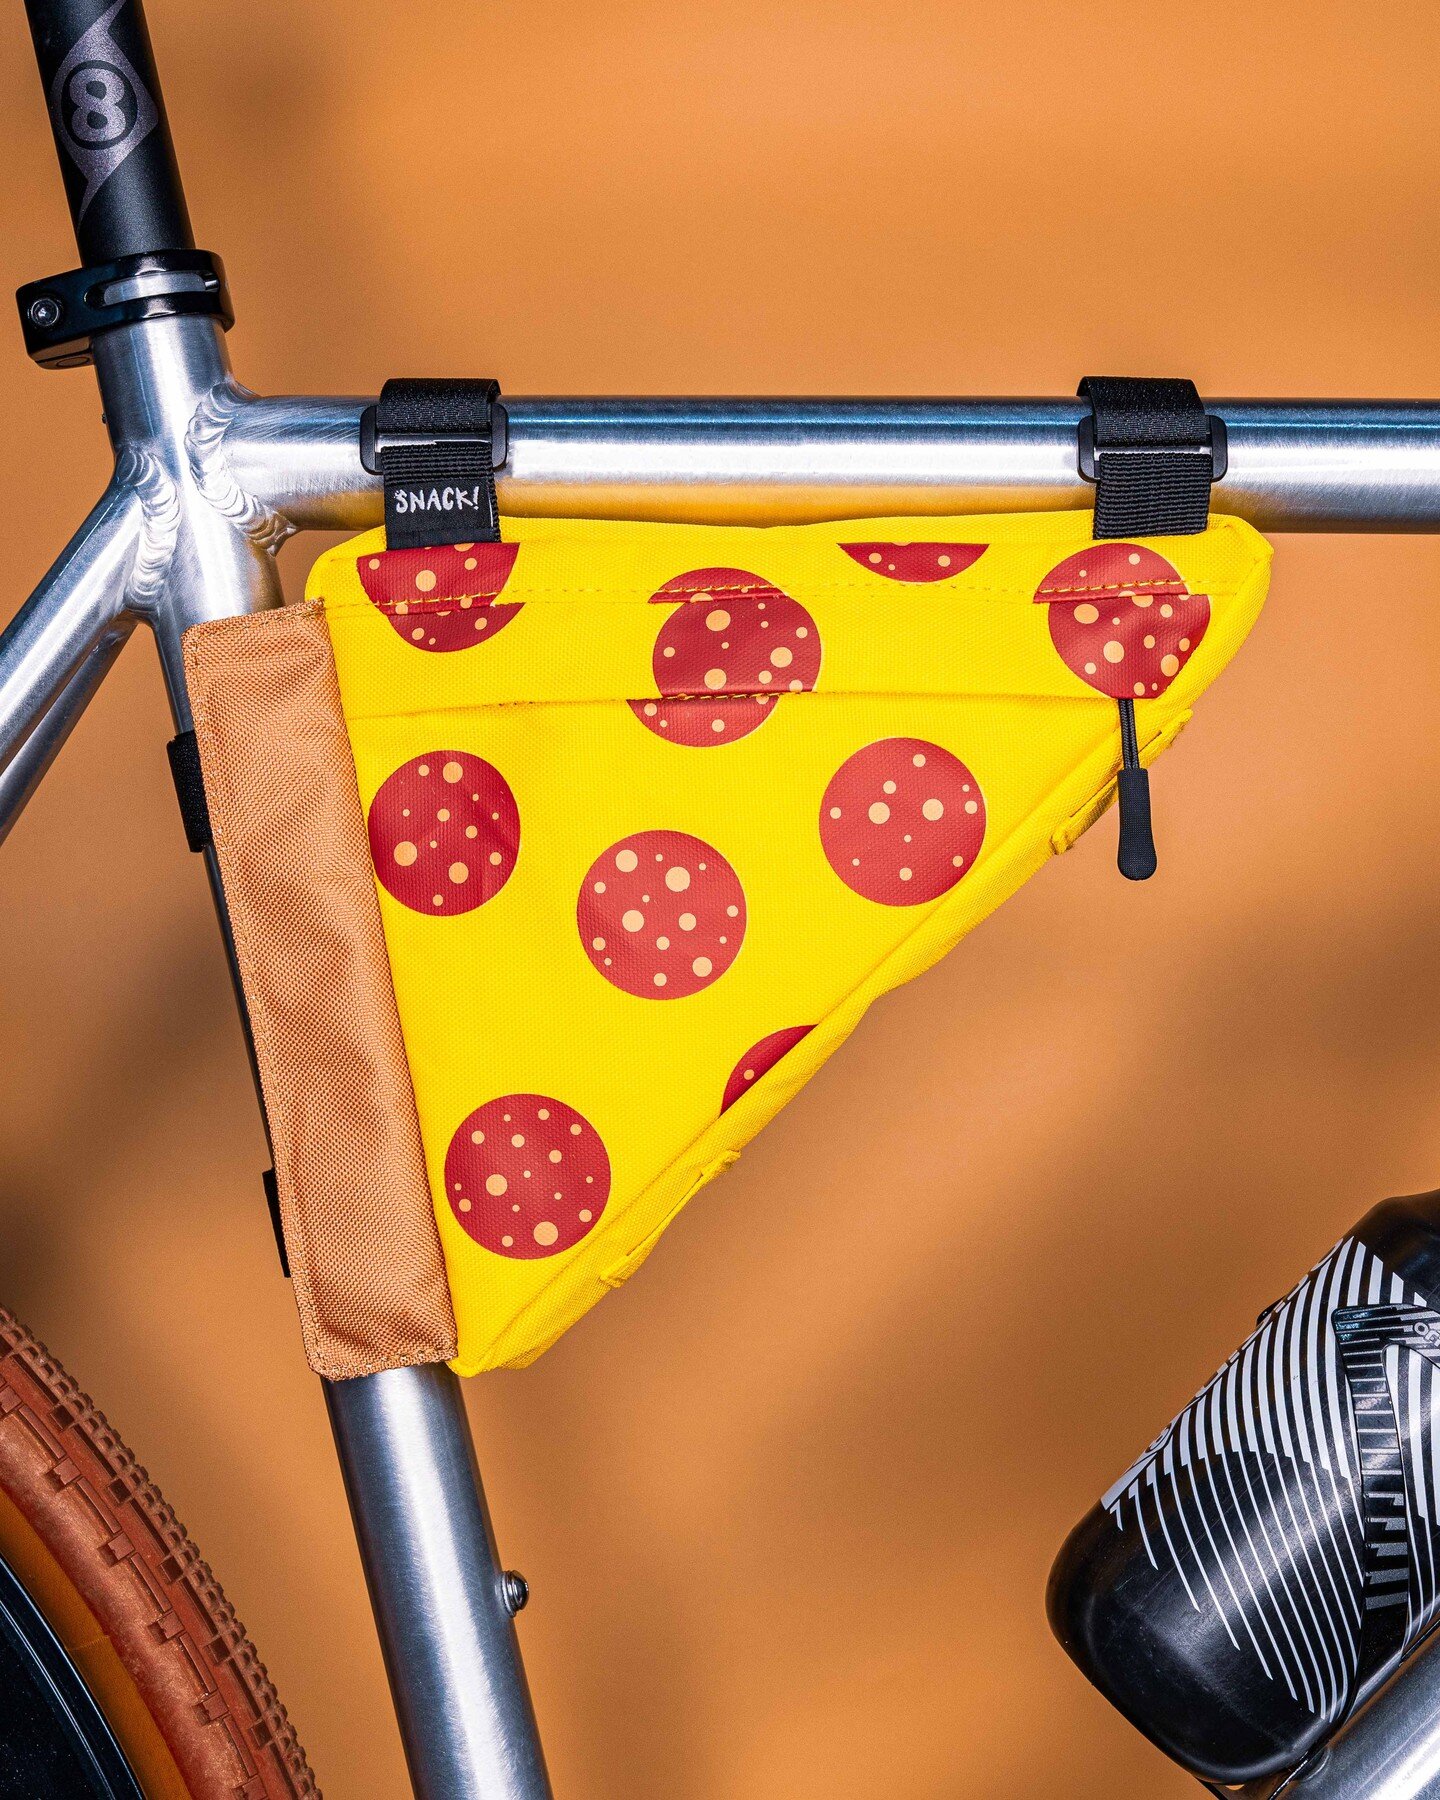 A whole day dedicated to PIZZA?! Count us in!! Grab a slice, it's National Pizza Day! 🍕Who's riding to their local pizza joint to celebrate?!

#SnackSocialClub